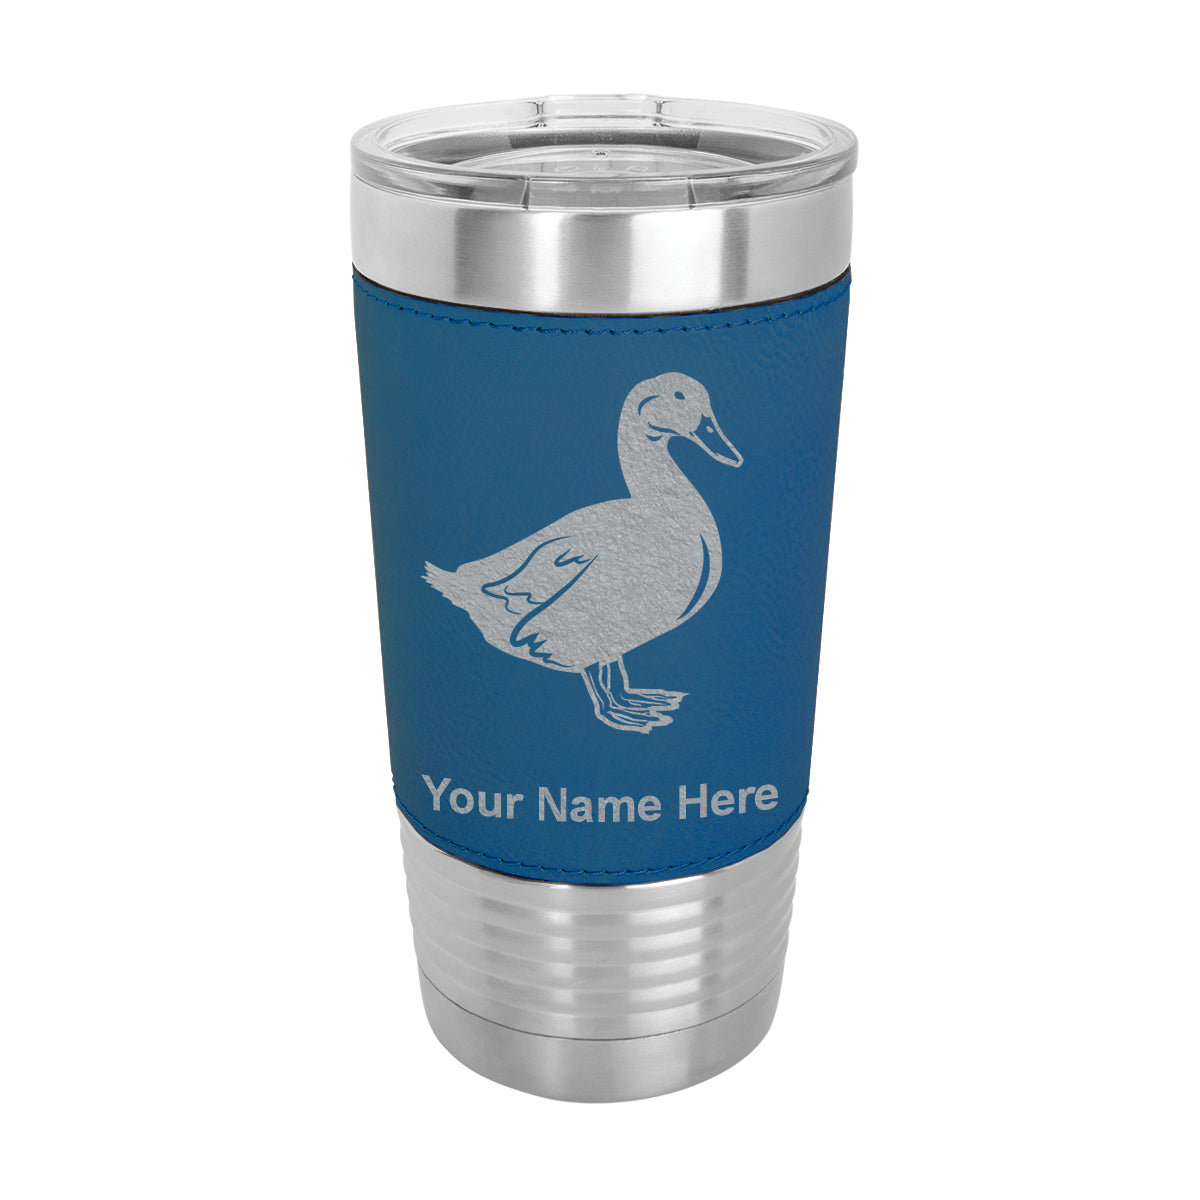 20oz Faux Leather Tumbler Mug, Duck, Personalized Engraving Included - LaserGram Custom Engraved Gifts